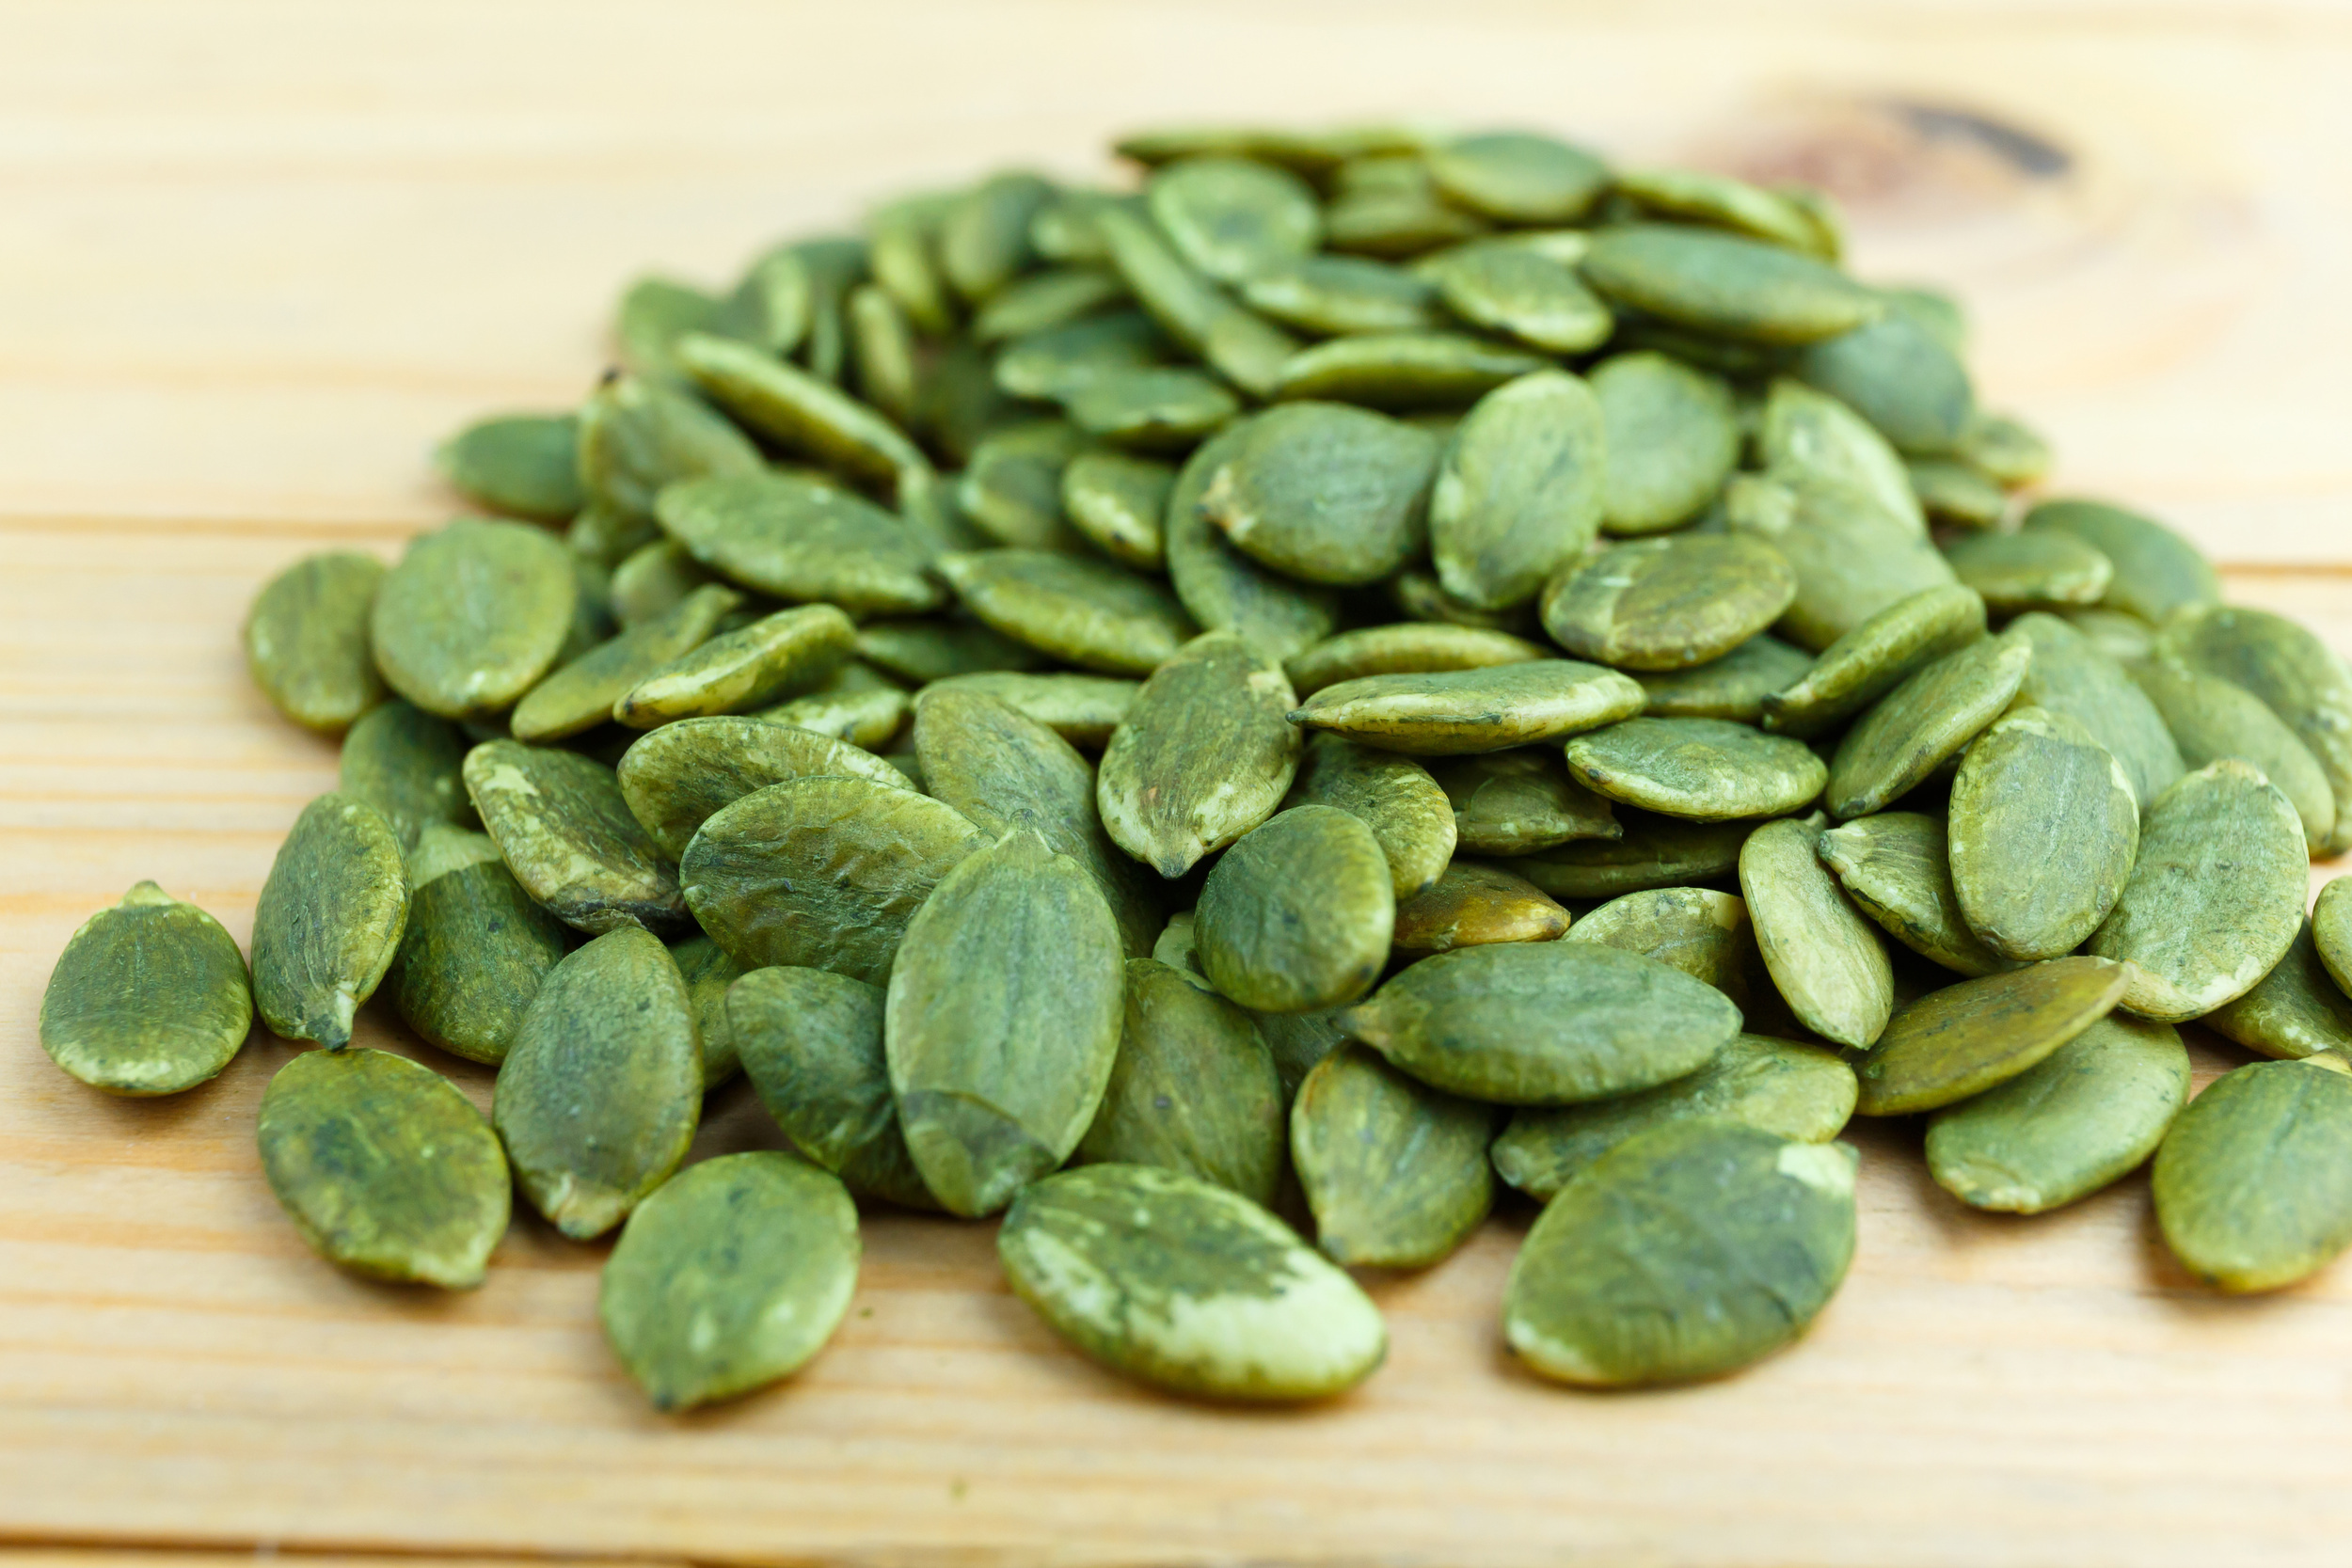 <p>Pumpkin seeds aren’t just something that gets thrown away when making a jack-o-lantern—they’re a delicious and nutritious food! Hulled pumpkin seeds add a nice crunch to any trail mix, and they’re packed with powerful antioxidants and nutrients like magnesium, potassium, manganese, iron, zinc, copper, and vitamin E!</p><p>You may also like: <a href='https://www.yardbarker.com/lifestyle/articles/did_you_know_that_these_20_foods_are_actually_fruits/s1__35605691'>Did you know that these 20 foods are actually fruits?</a></p>